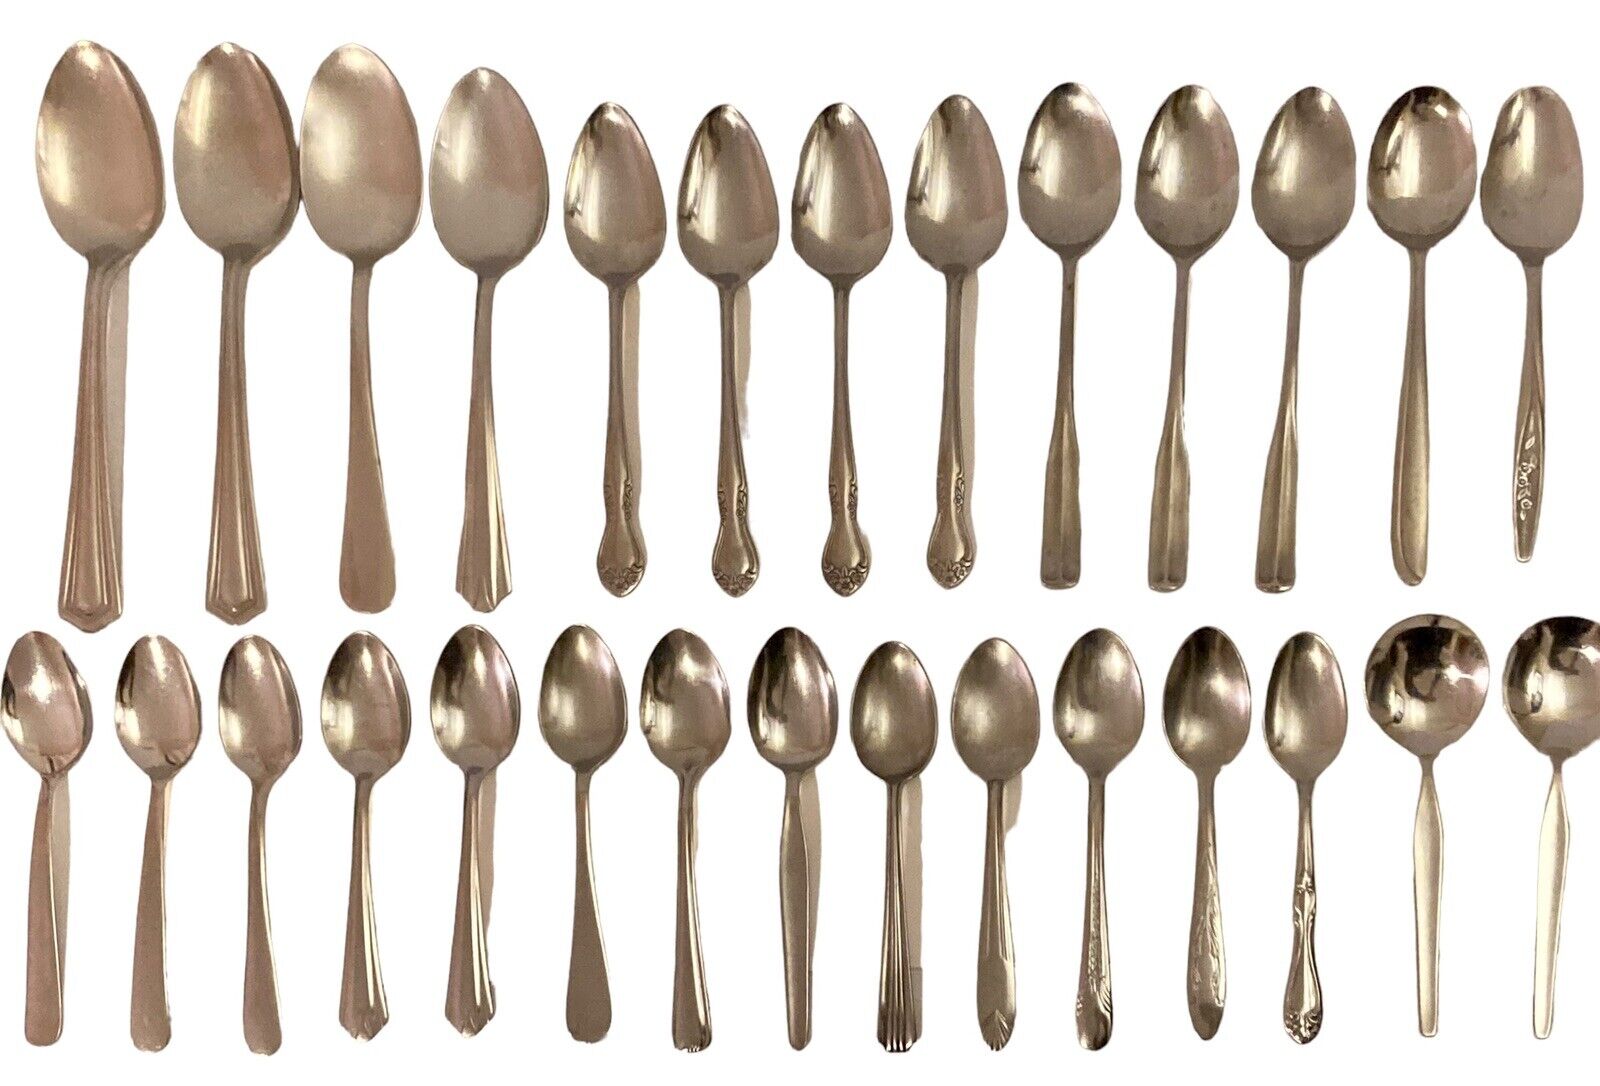 Mixed Lot of 28 Vintage Stainless Steel Spoons Serving Dinner Soup Tablespoons